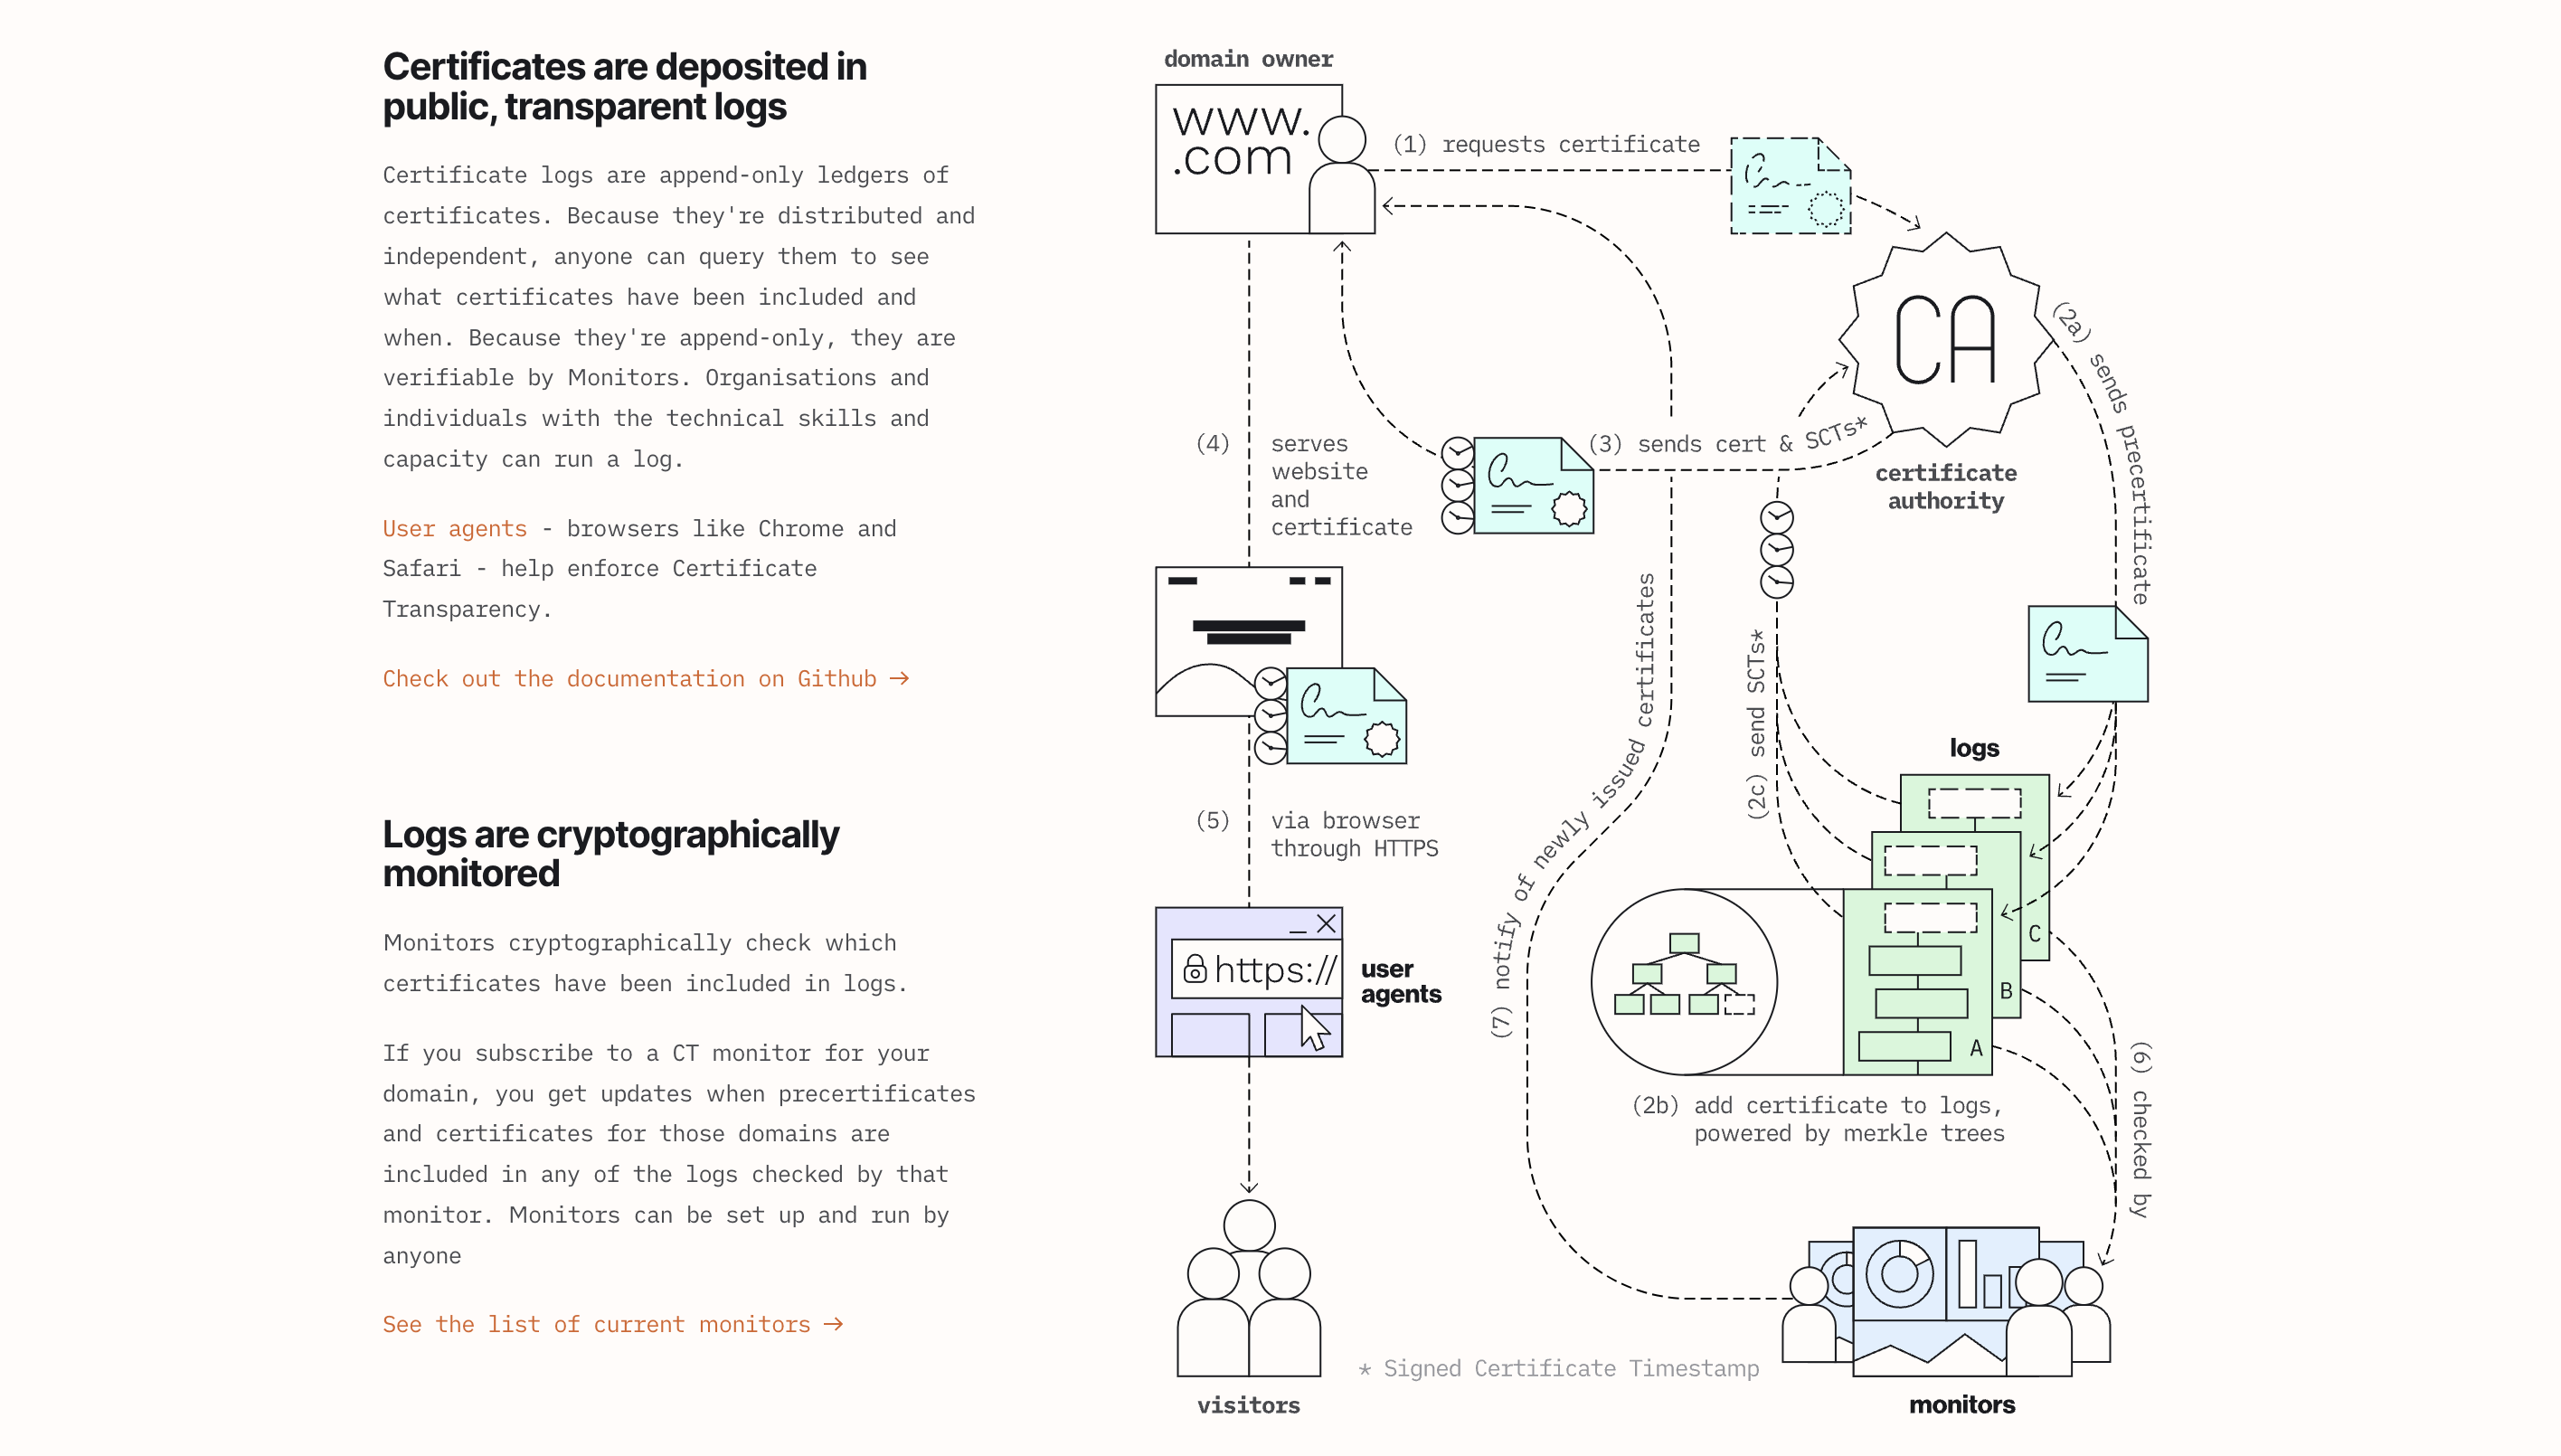 How CT works (image source: certificate.transparency.dev)